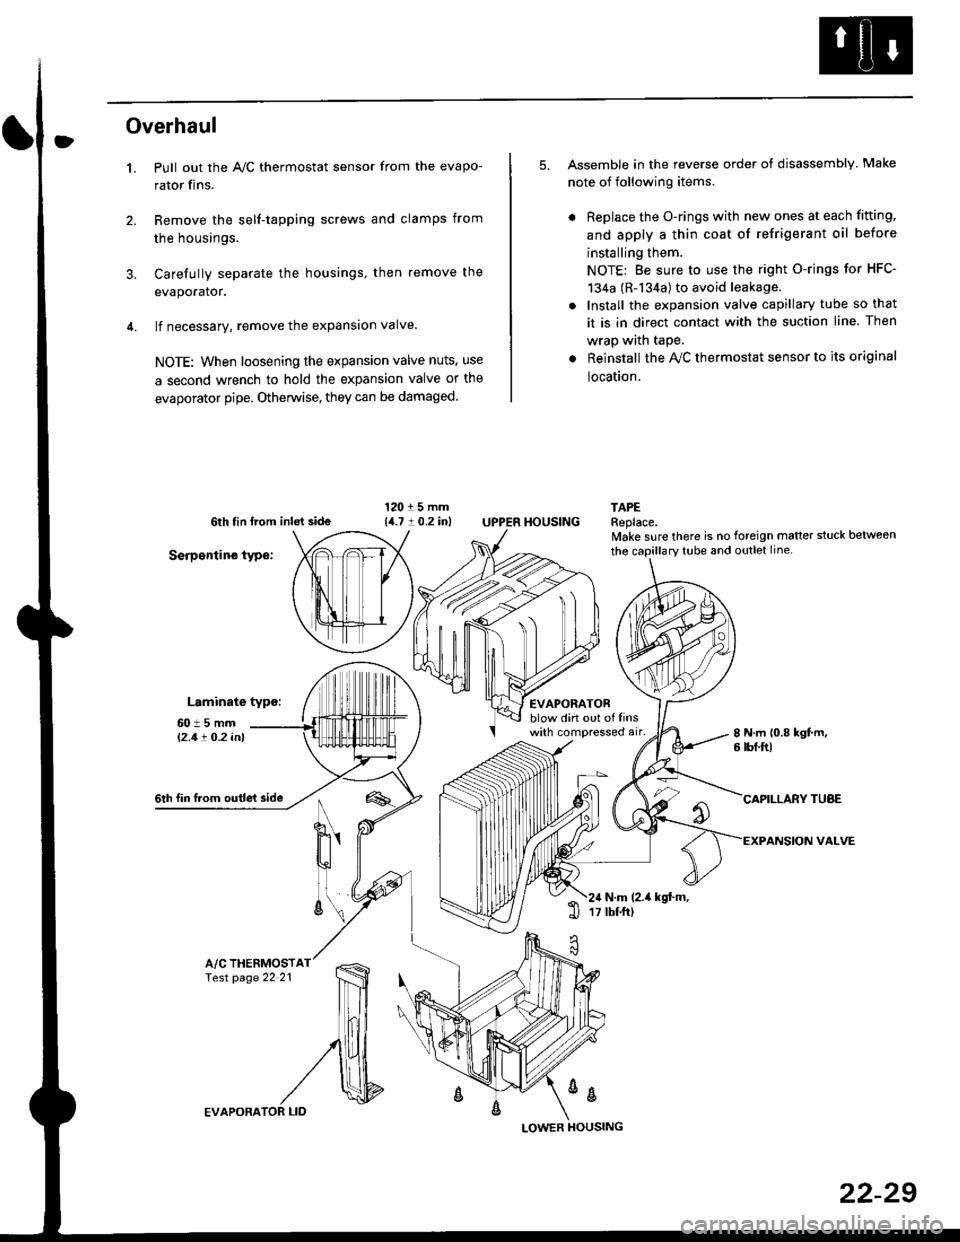 HONDA CIVIC 1998 6.G Workshop Manual Overhaul
1.
3.
Pull out the A,/C thermostat sensor from the evapo-
rator fins.
Remove the self-tapping screws and clamps from
the housings.
Carefully separate the housings, then remove the
evaporator.